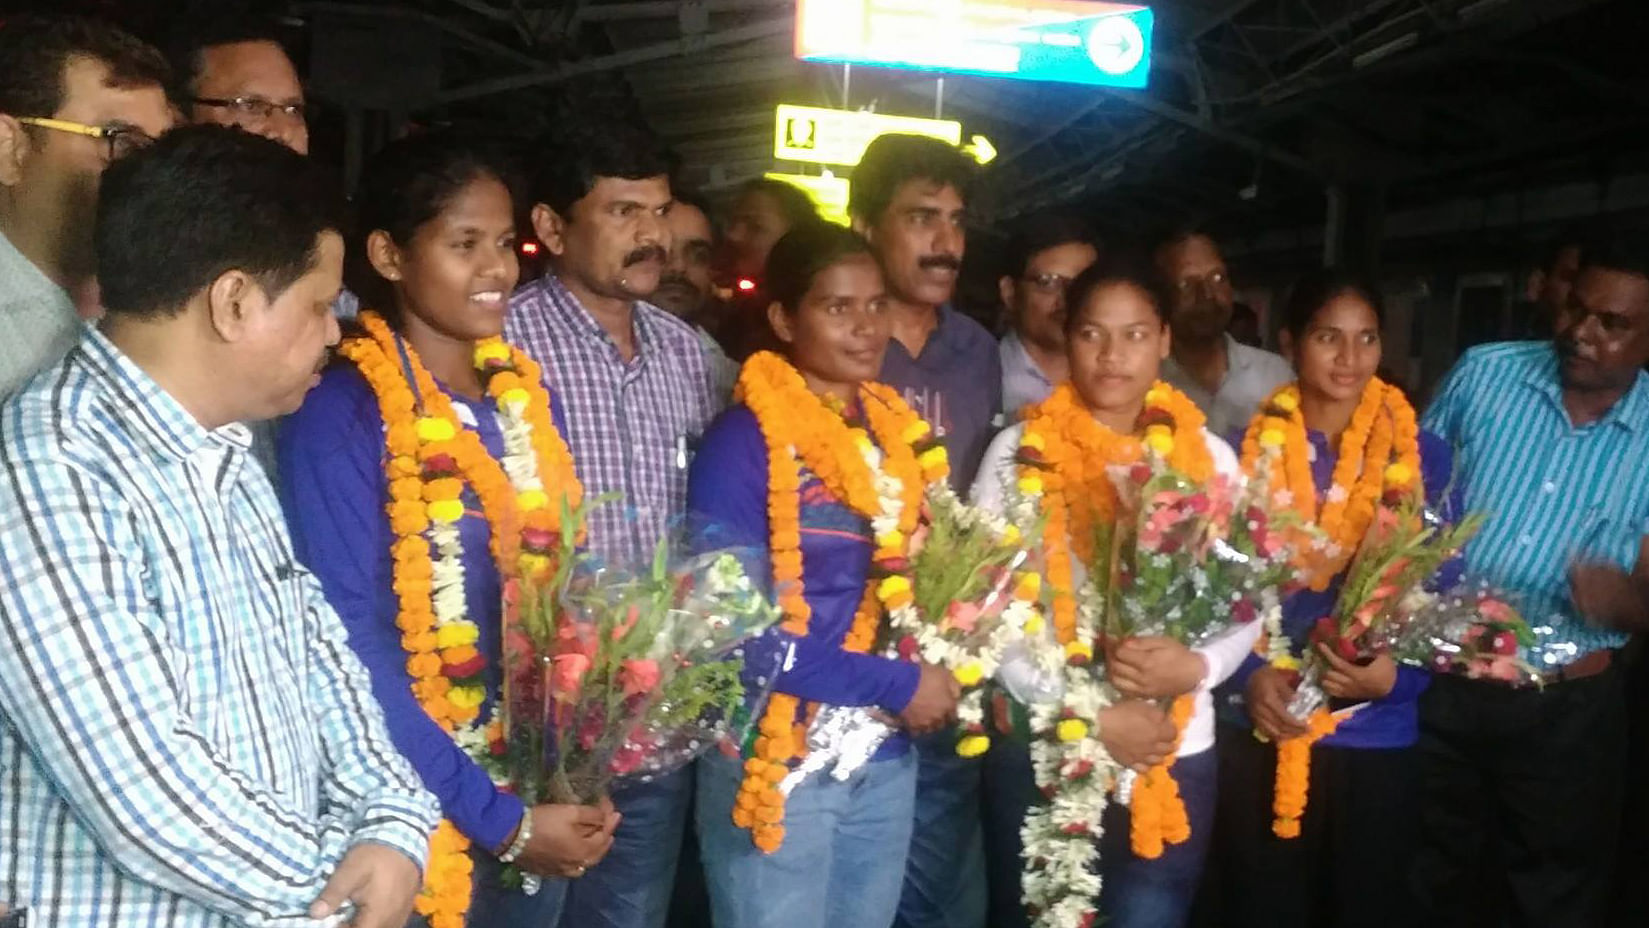 Deep Grace Ekka, Namita Toppo, Lilima Minz and Sunita Lakra greeted by local authorities at the railway station.&nbsp;